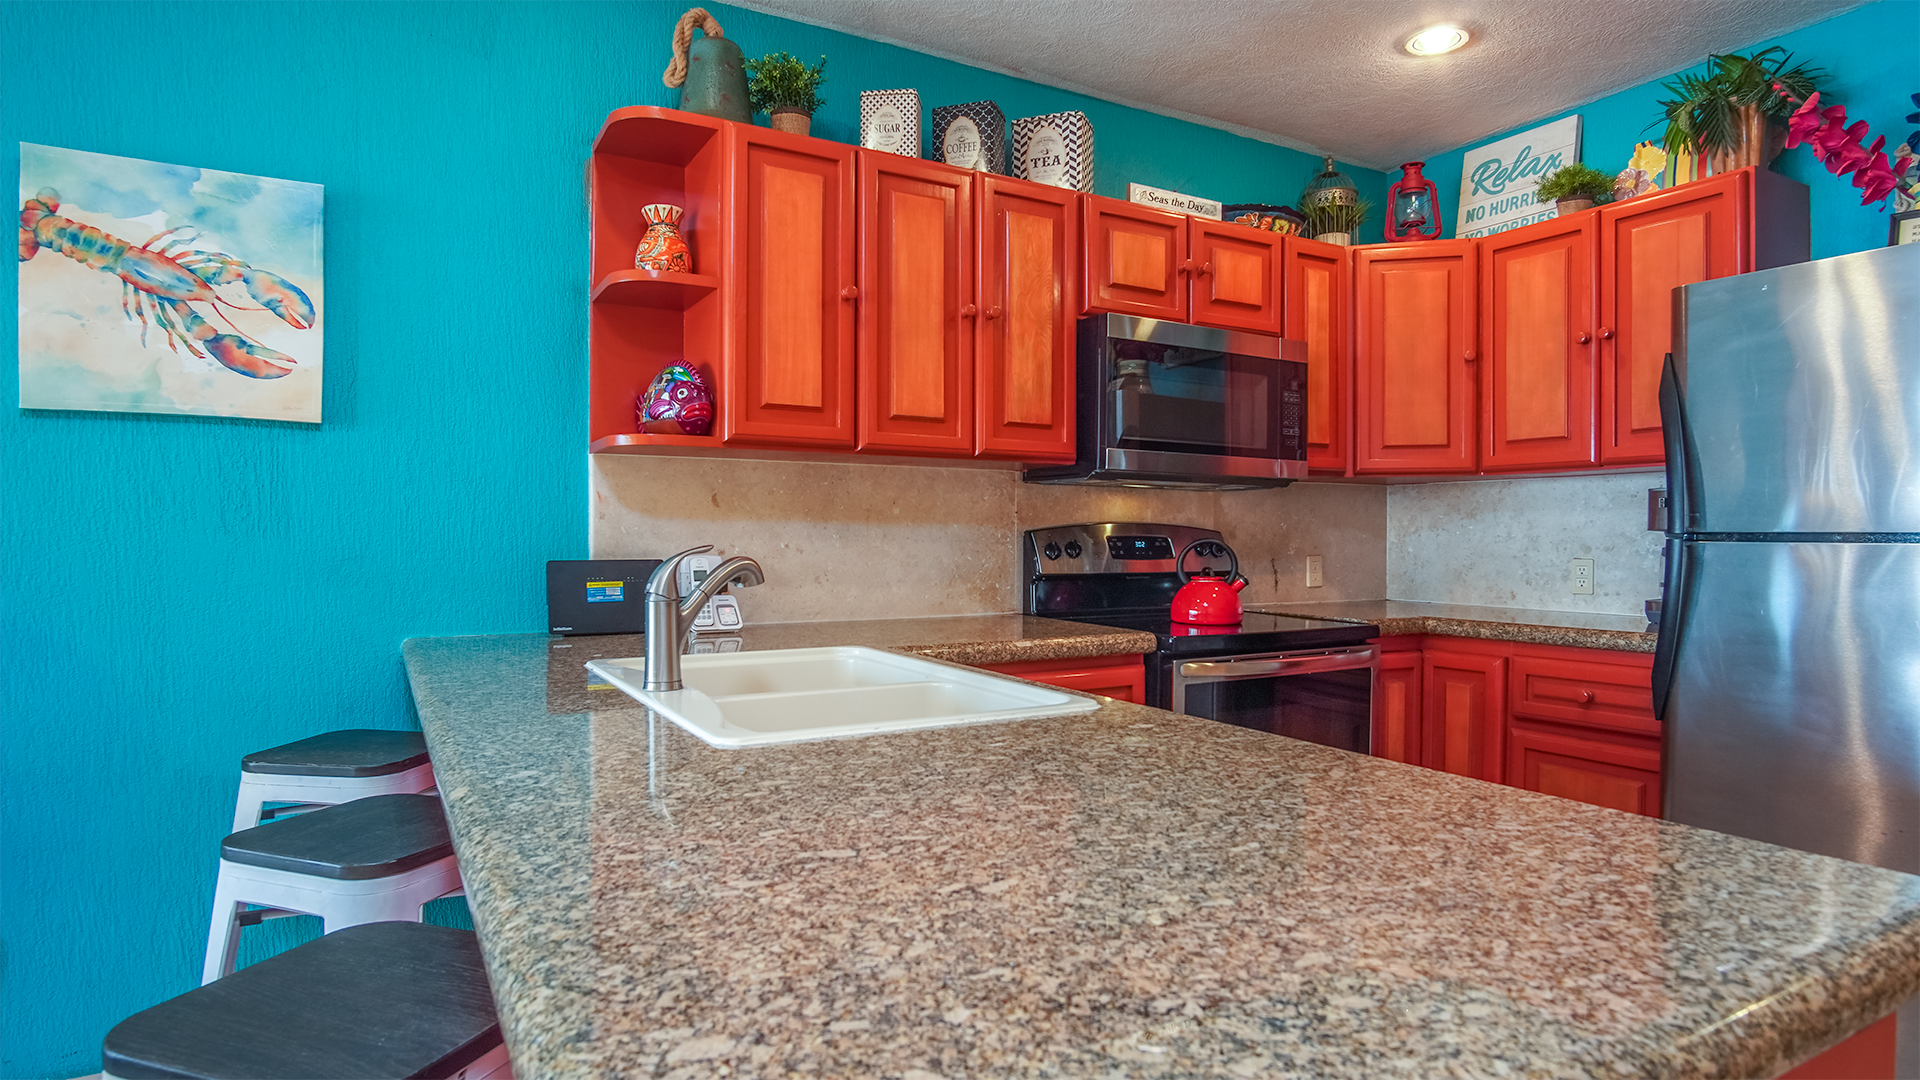 The kitchen features all appliances and lots of counters and cabinets.